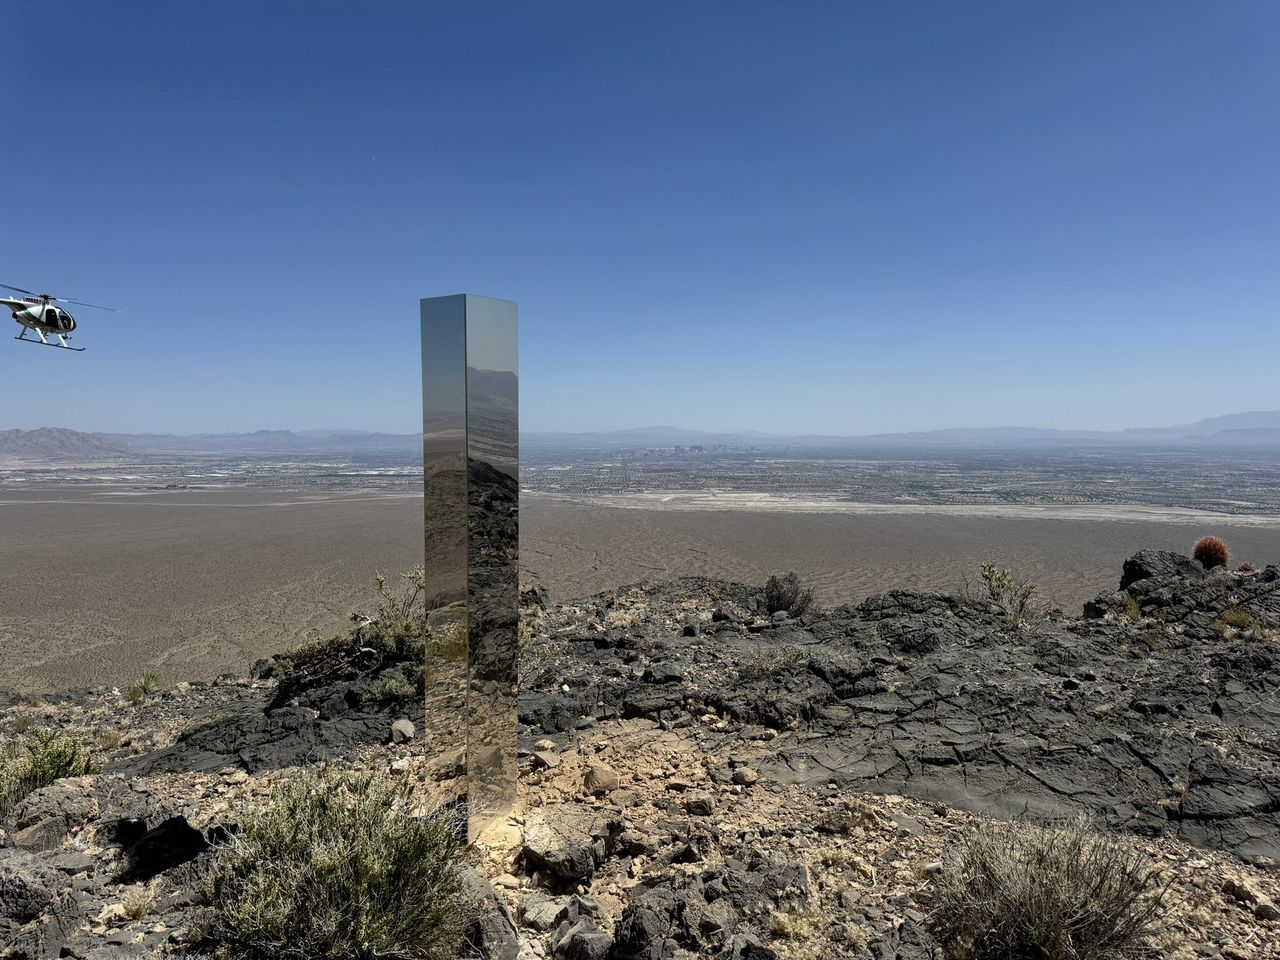 A mysterious monolith appeared in the desert in the USA. Where did it come from and what does it mean?